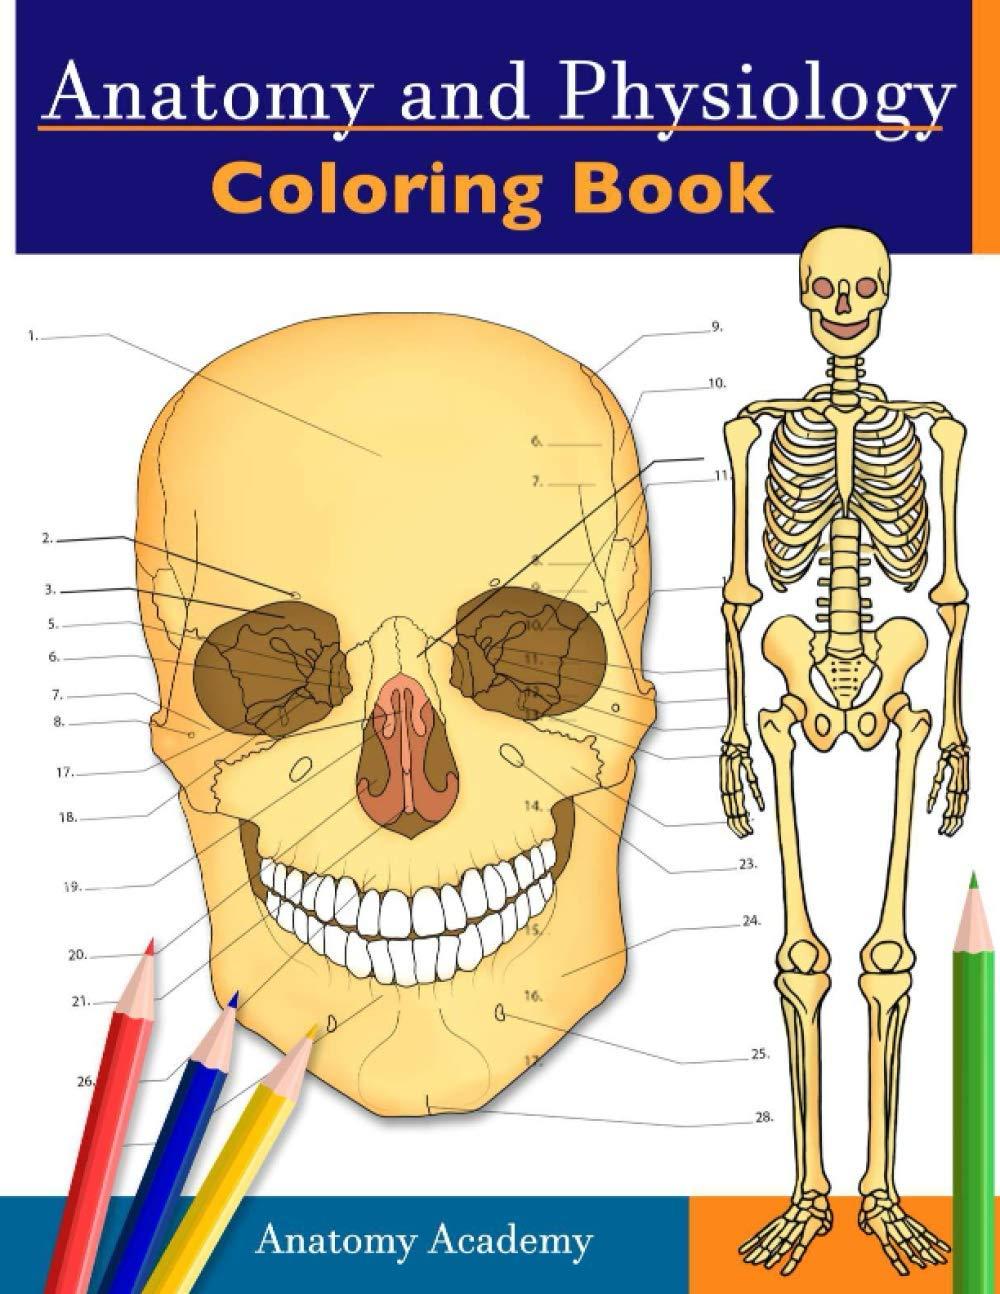 anatomy and physiology coloring book  anatomy academy 1914207041, 978-1914207044